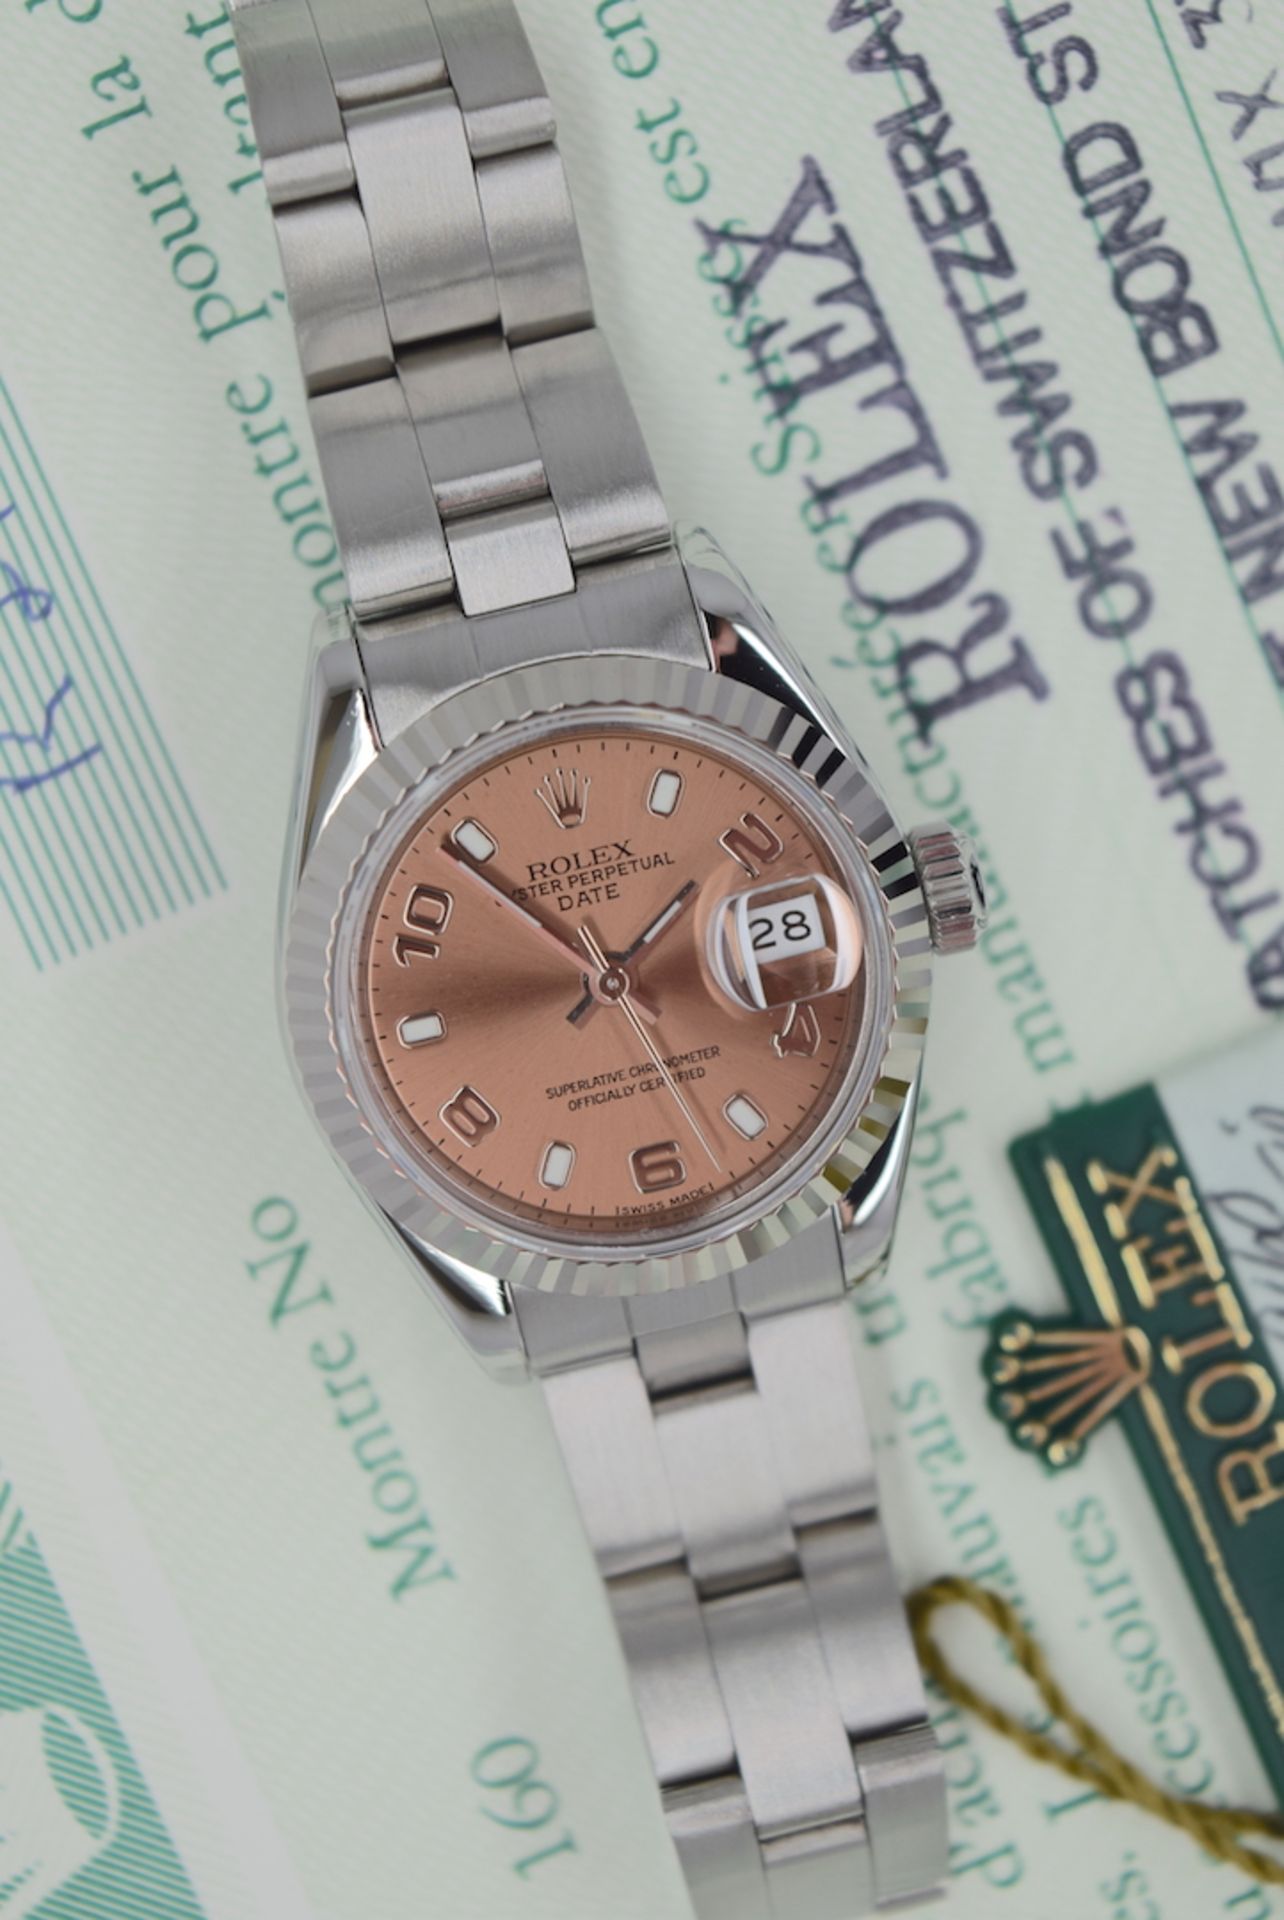 Rolex Datejust 18k White Gold/ Steel (Salmon Dial) & Certificate/ Tags